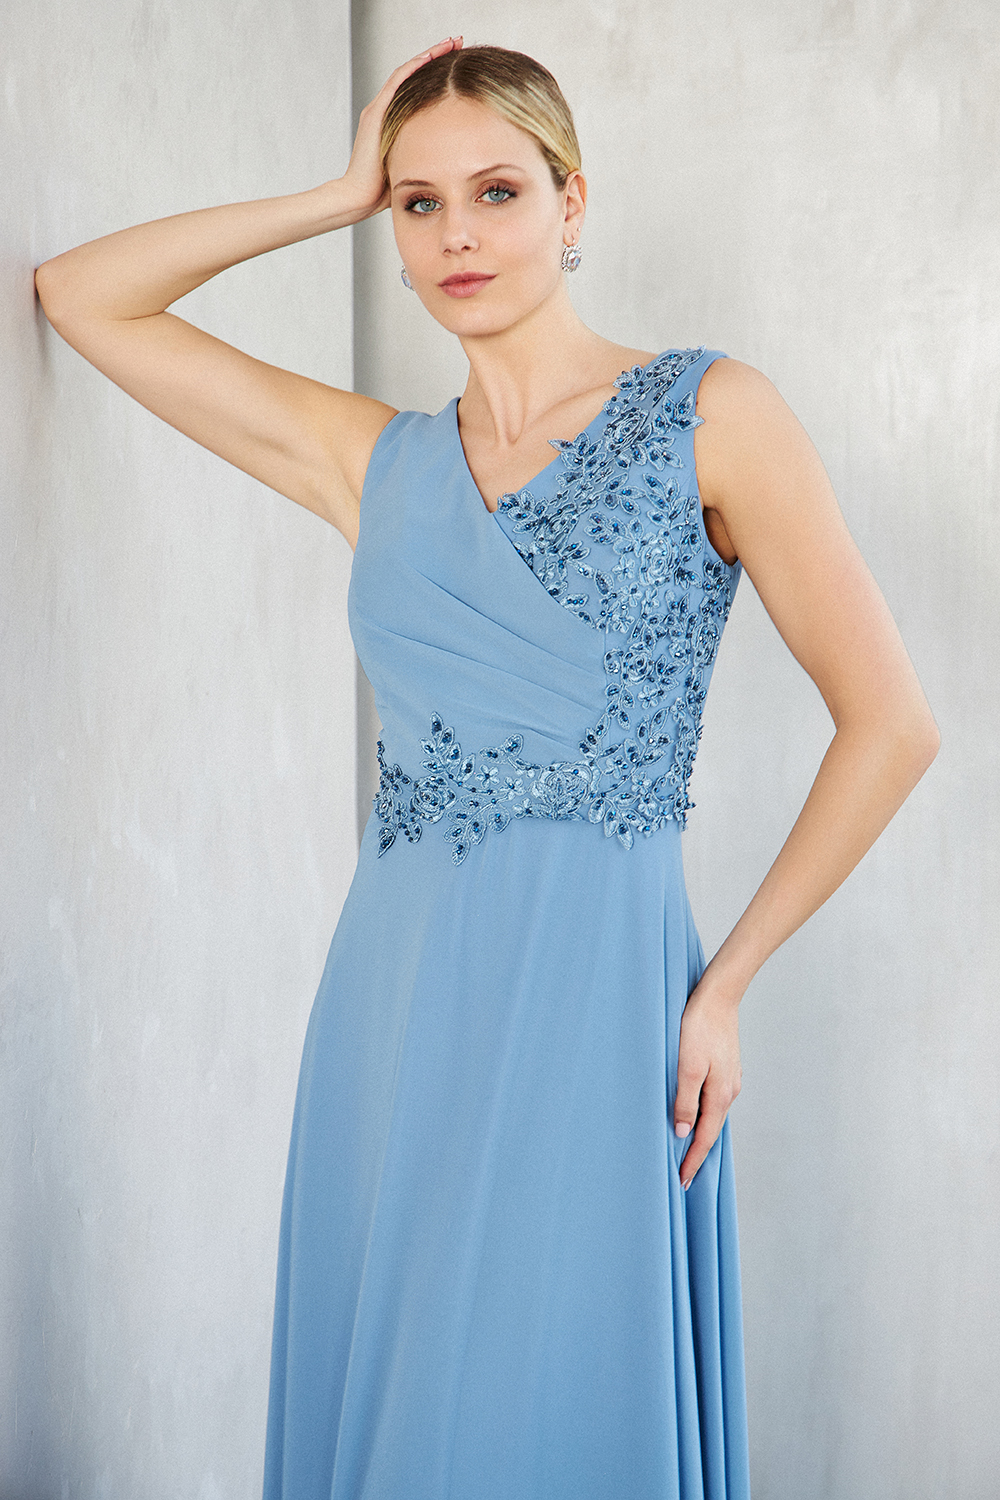 Classic Dresses / Long evening dress with chiffon fabric, lace top with beading and straps